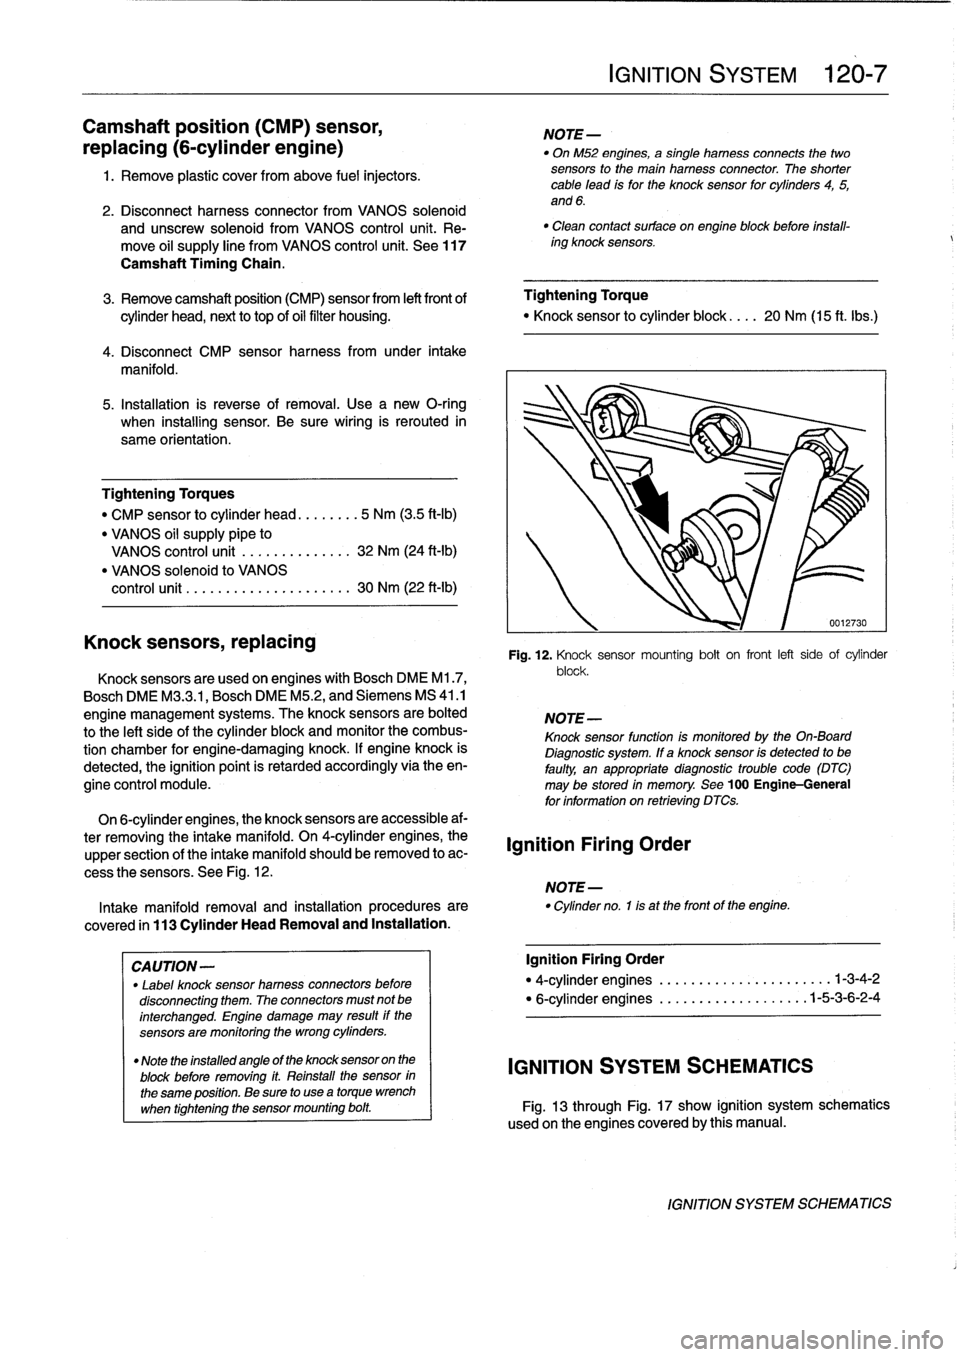 BMW M3 1995 E36 Owners Guide 
Camshaft
position
(CMP)
sensor,

replacing
(6-cylinder
engine)

1
.
Remove
plastic
cover
from
above
fuel
injectors
.

2
.
Disconnect
harness
connector
from
VANOS
solenoid

and
unscrew
solenoid
from
V